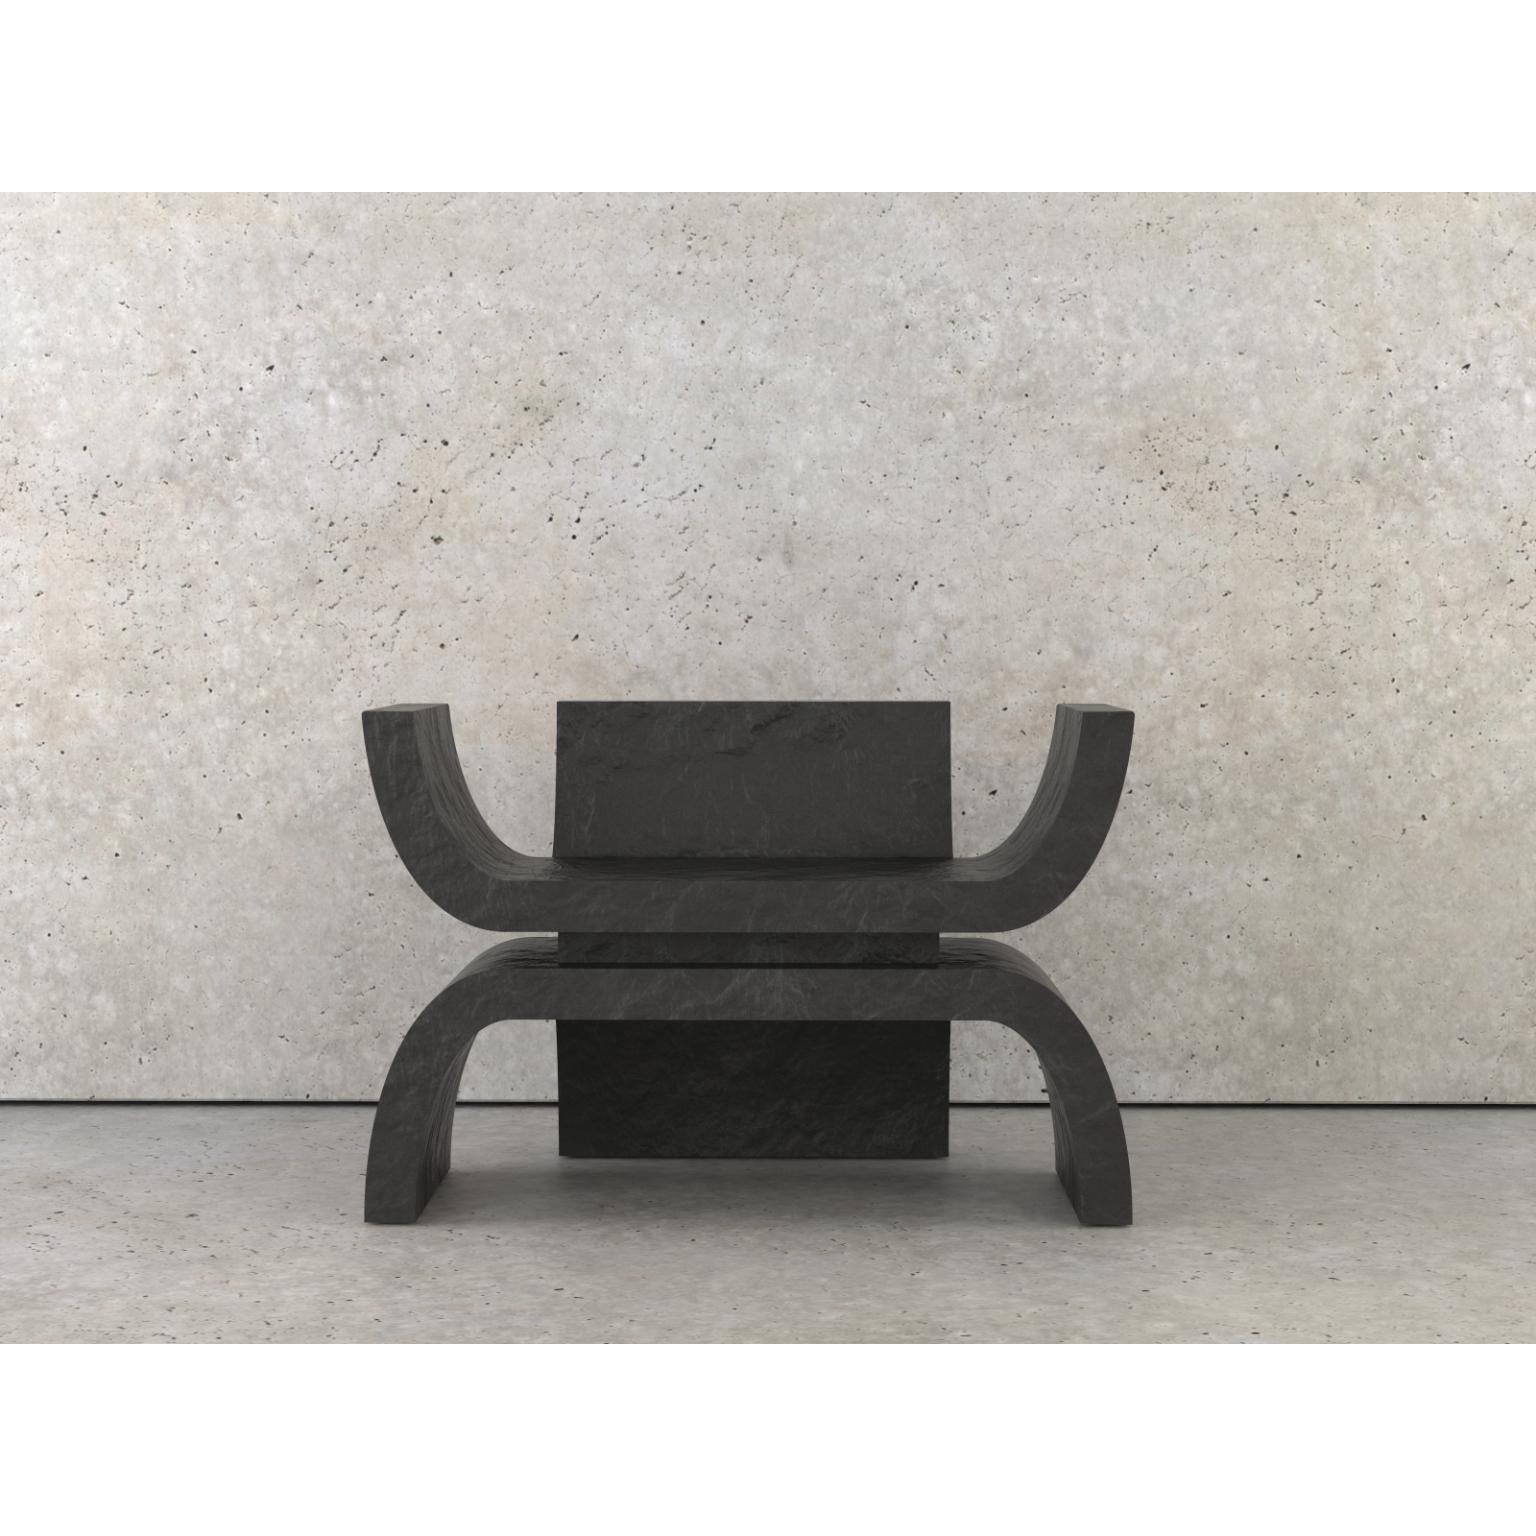 Kabuto Throne by Michel Amar
Dimensions: D 52 x W 105 x H 70 cm. 
Materials: Black bronze.

At the head of his own agency, Michel Amar has distinguished himself for more than thirty years in projects as eclectic as they are ambitious. This rich